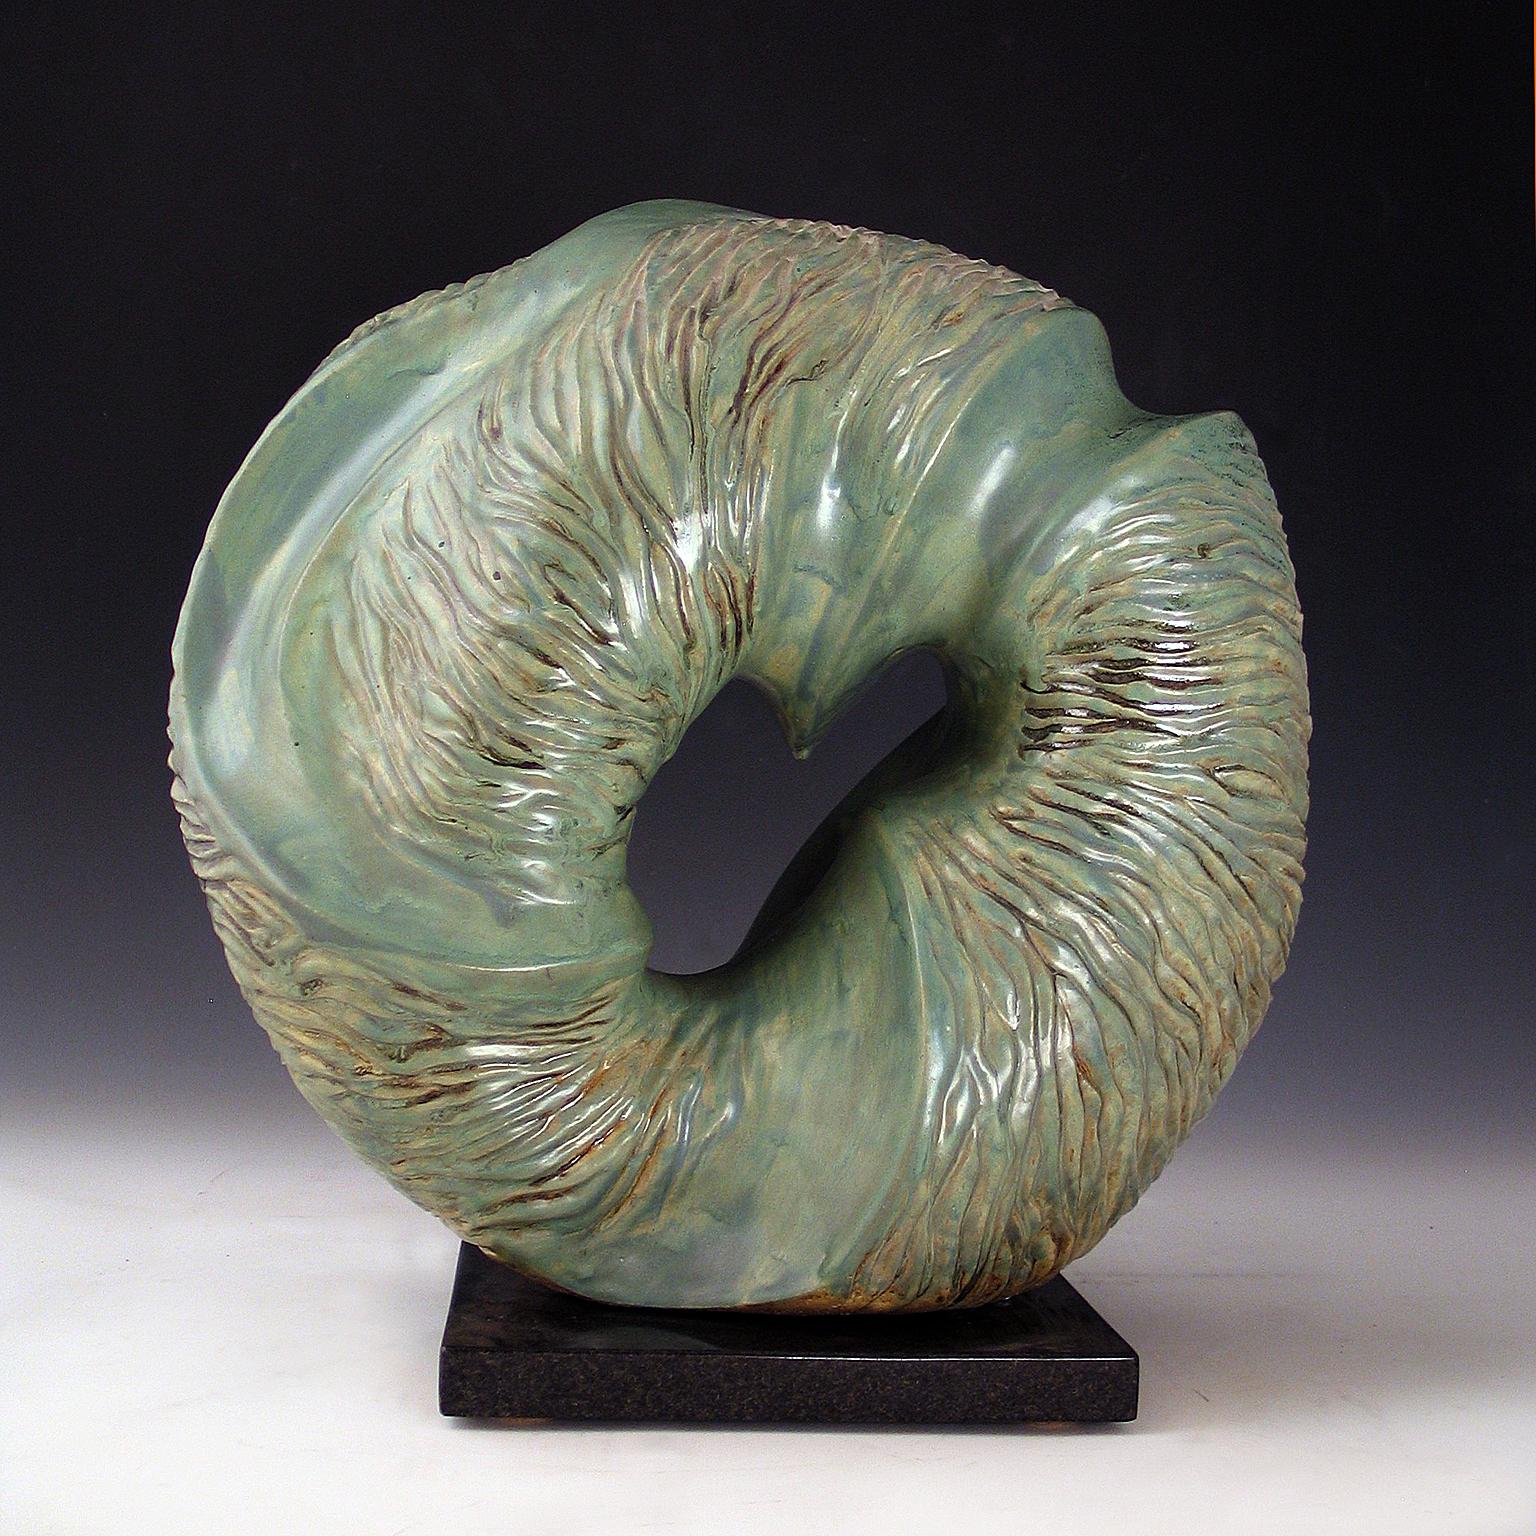 Elaine Lorenz Abstract Sculpture - “Aqua Incision”, blue green circular ceramic, carved with flowing water lines 